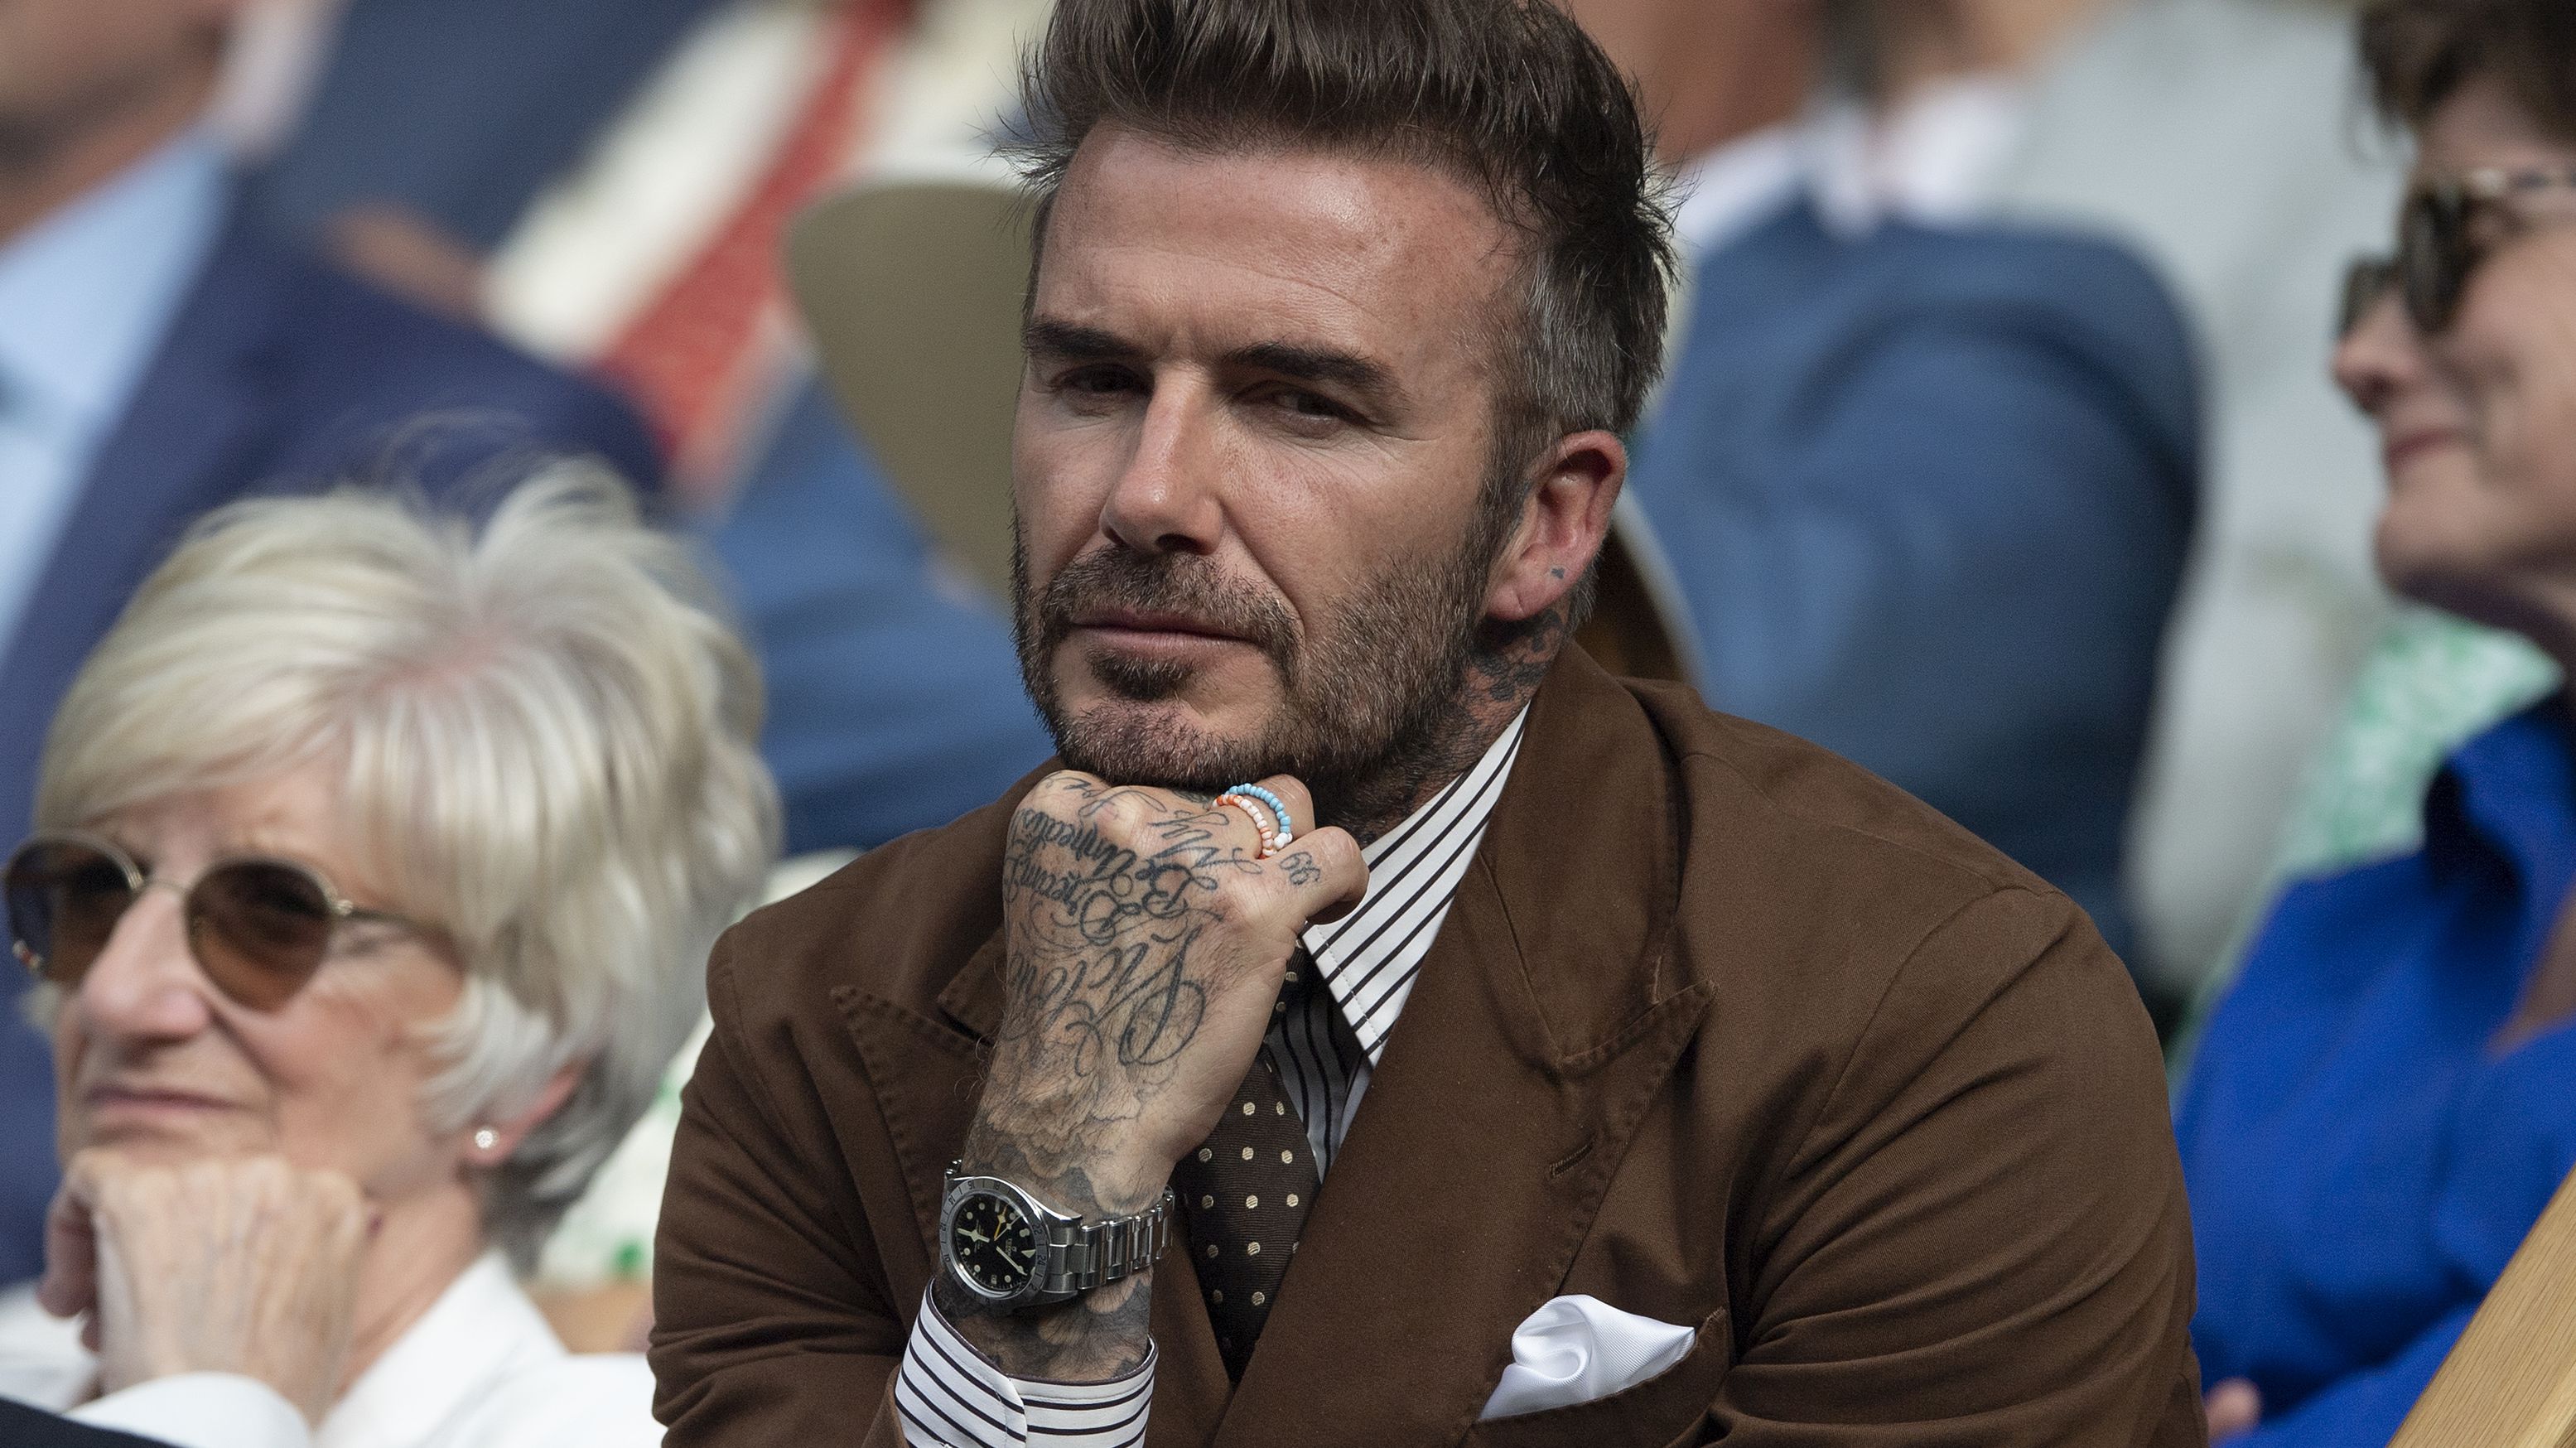 Former Manchester United and England footballer David Beckham watching the action at Wimbledon in 2022. (Photo by Visionhaus/Getty Images)